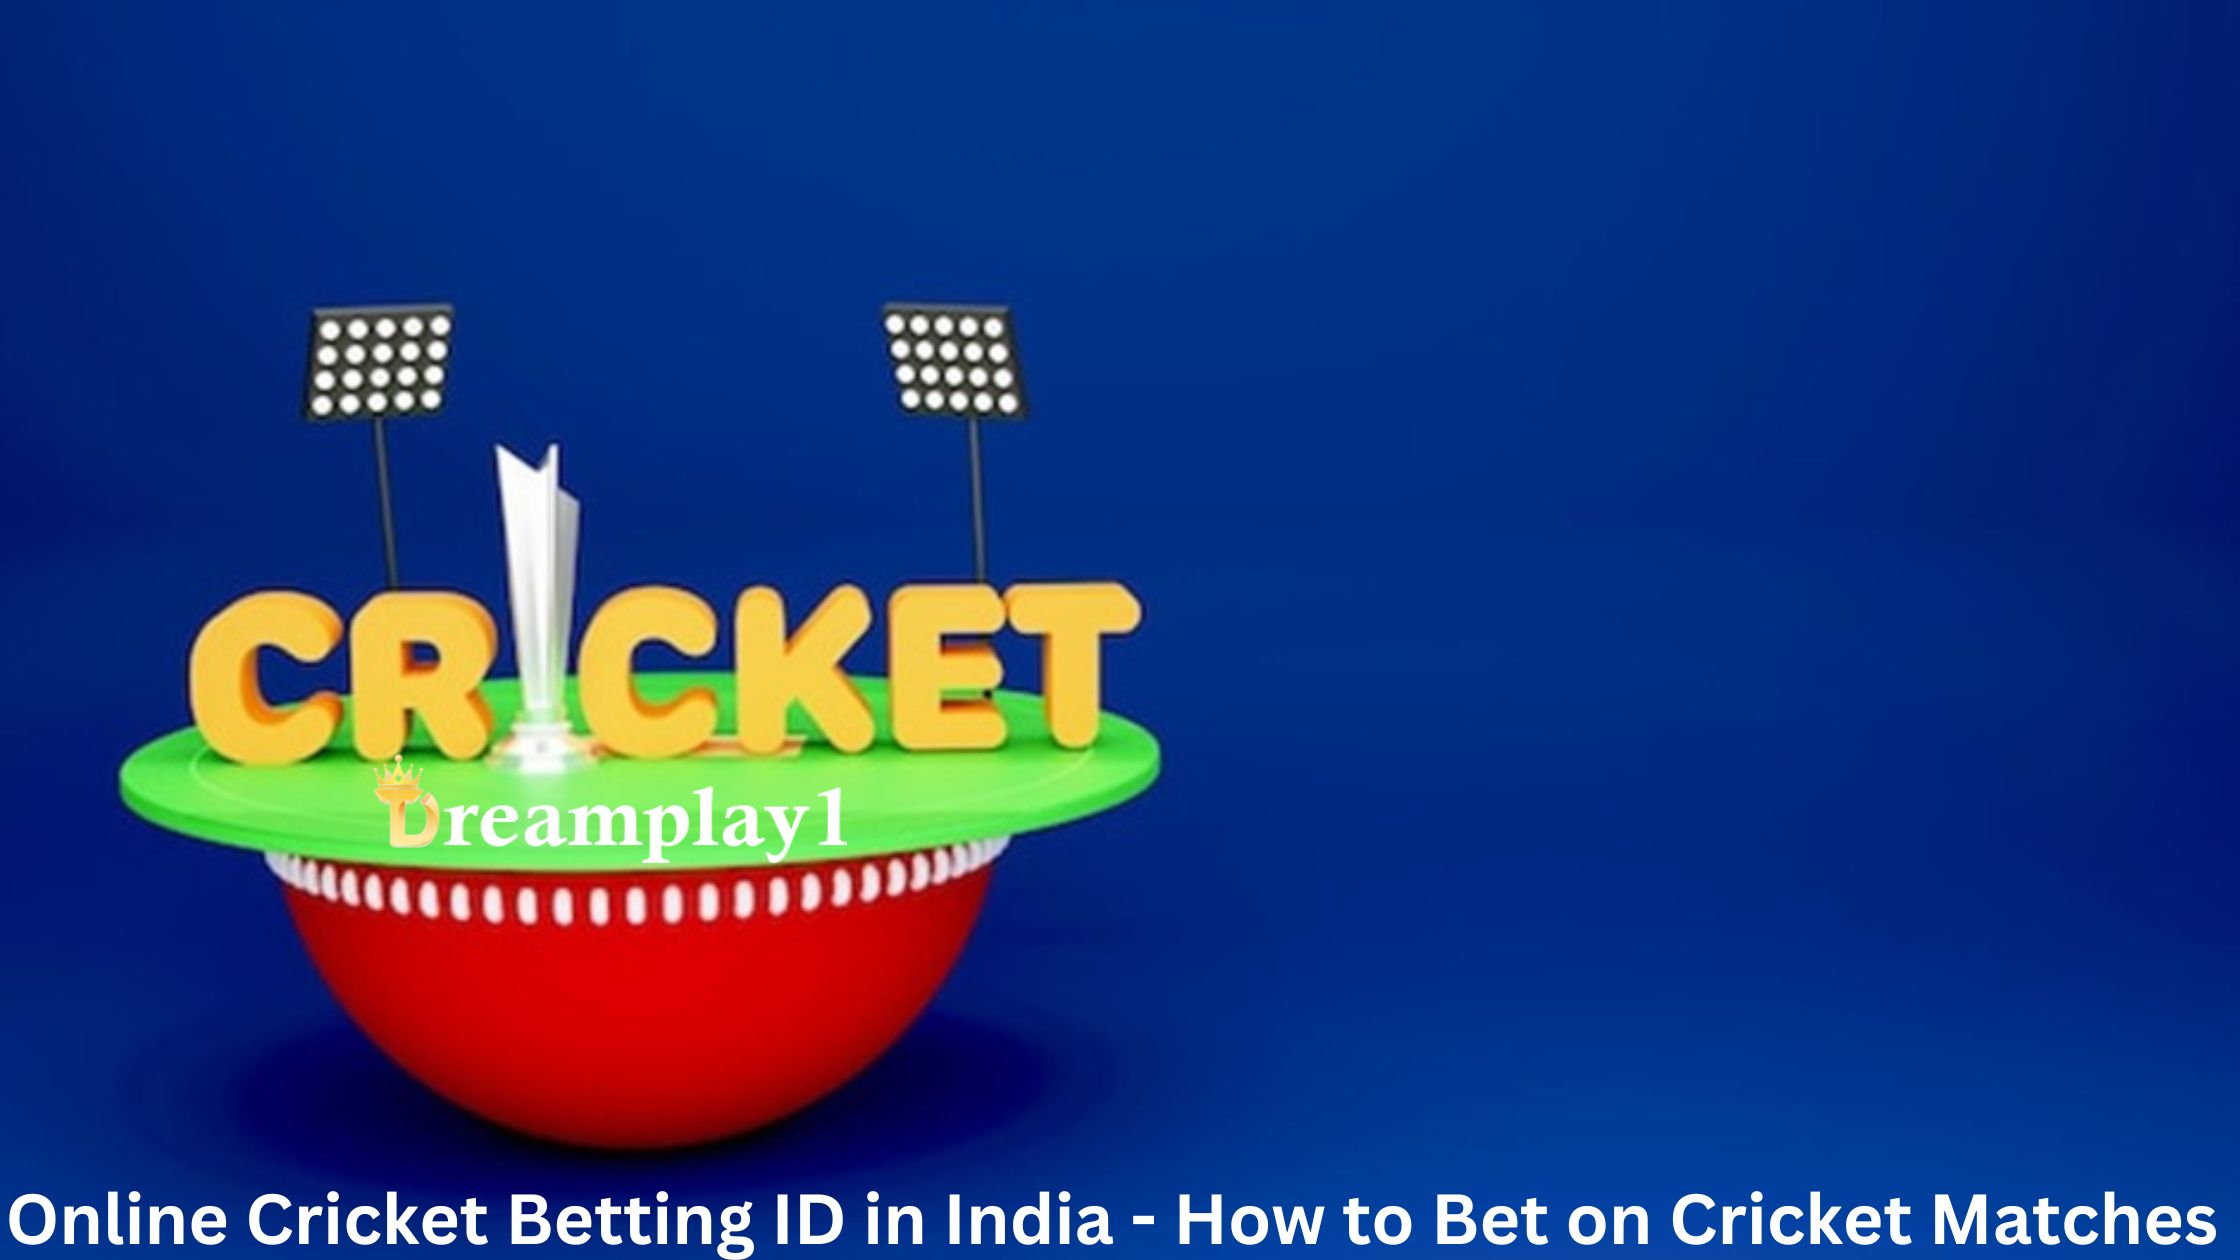 Online Cricket Betting ID in India - How to Bet on Cricket Matches